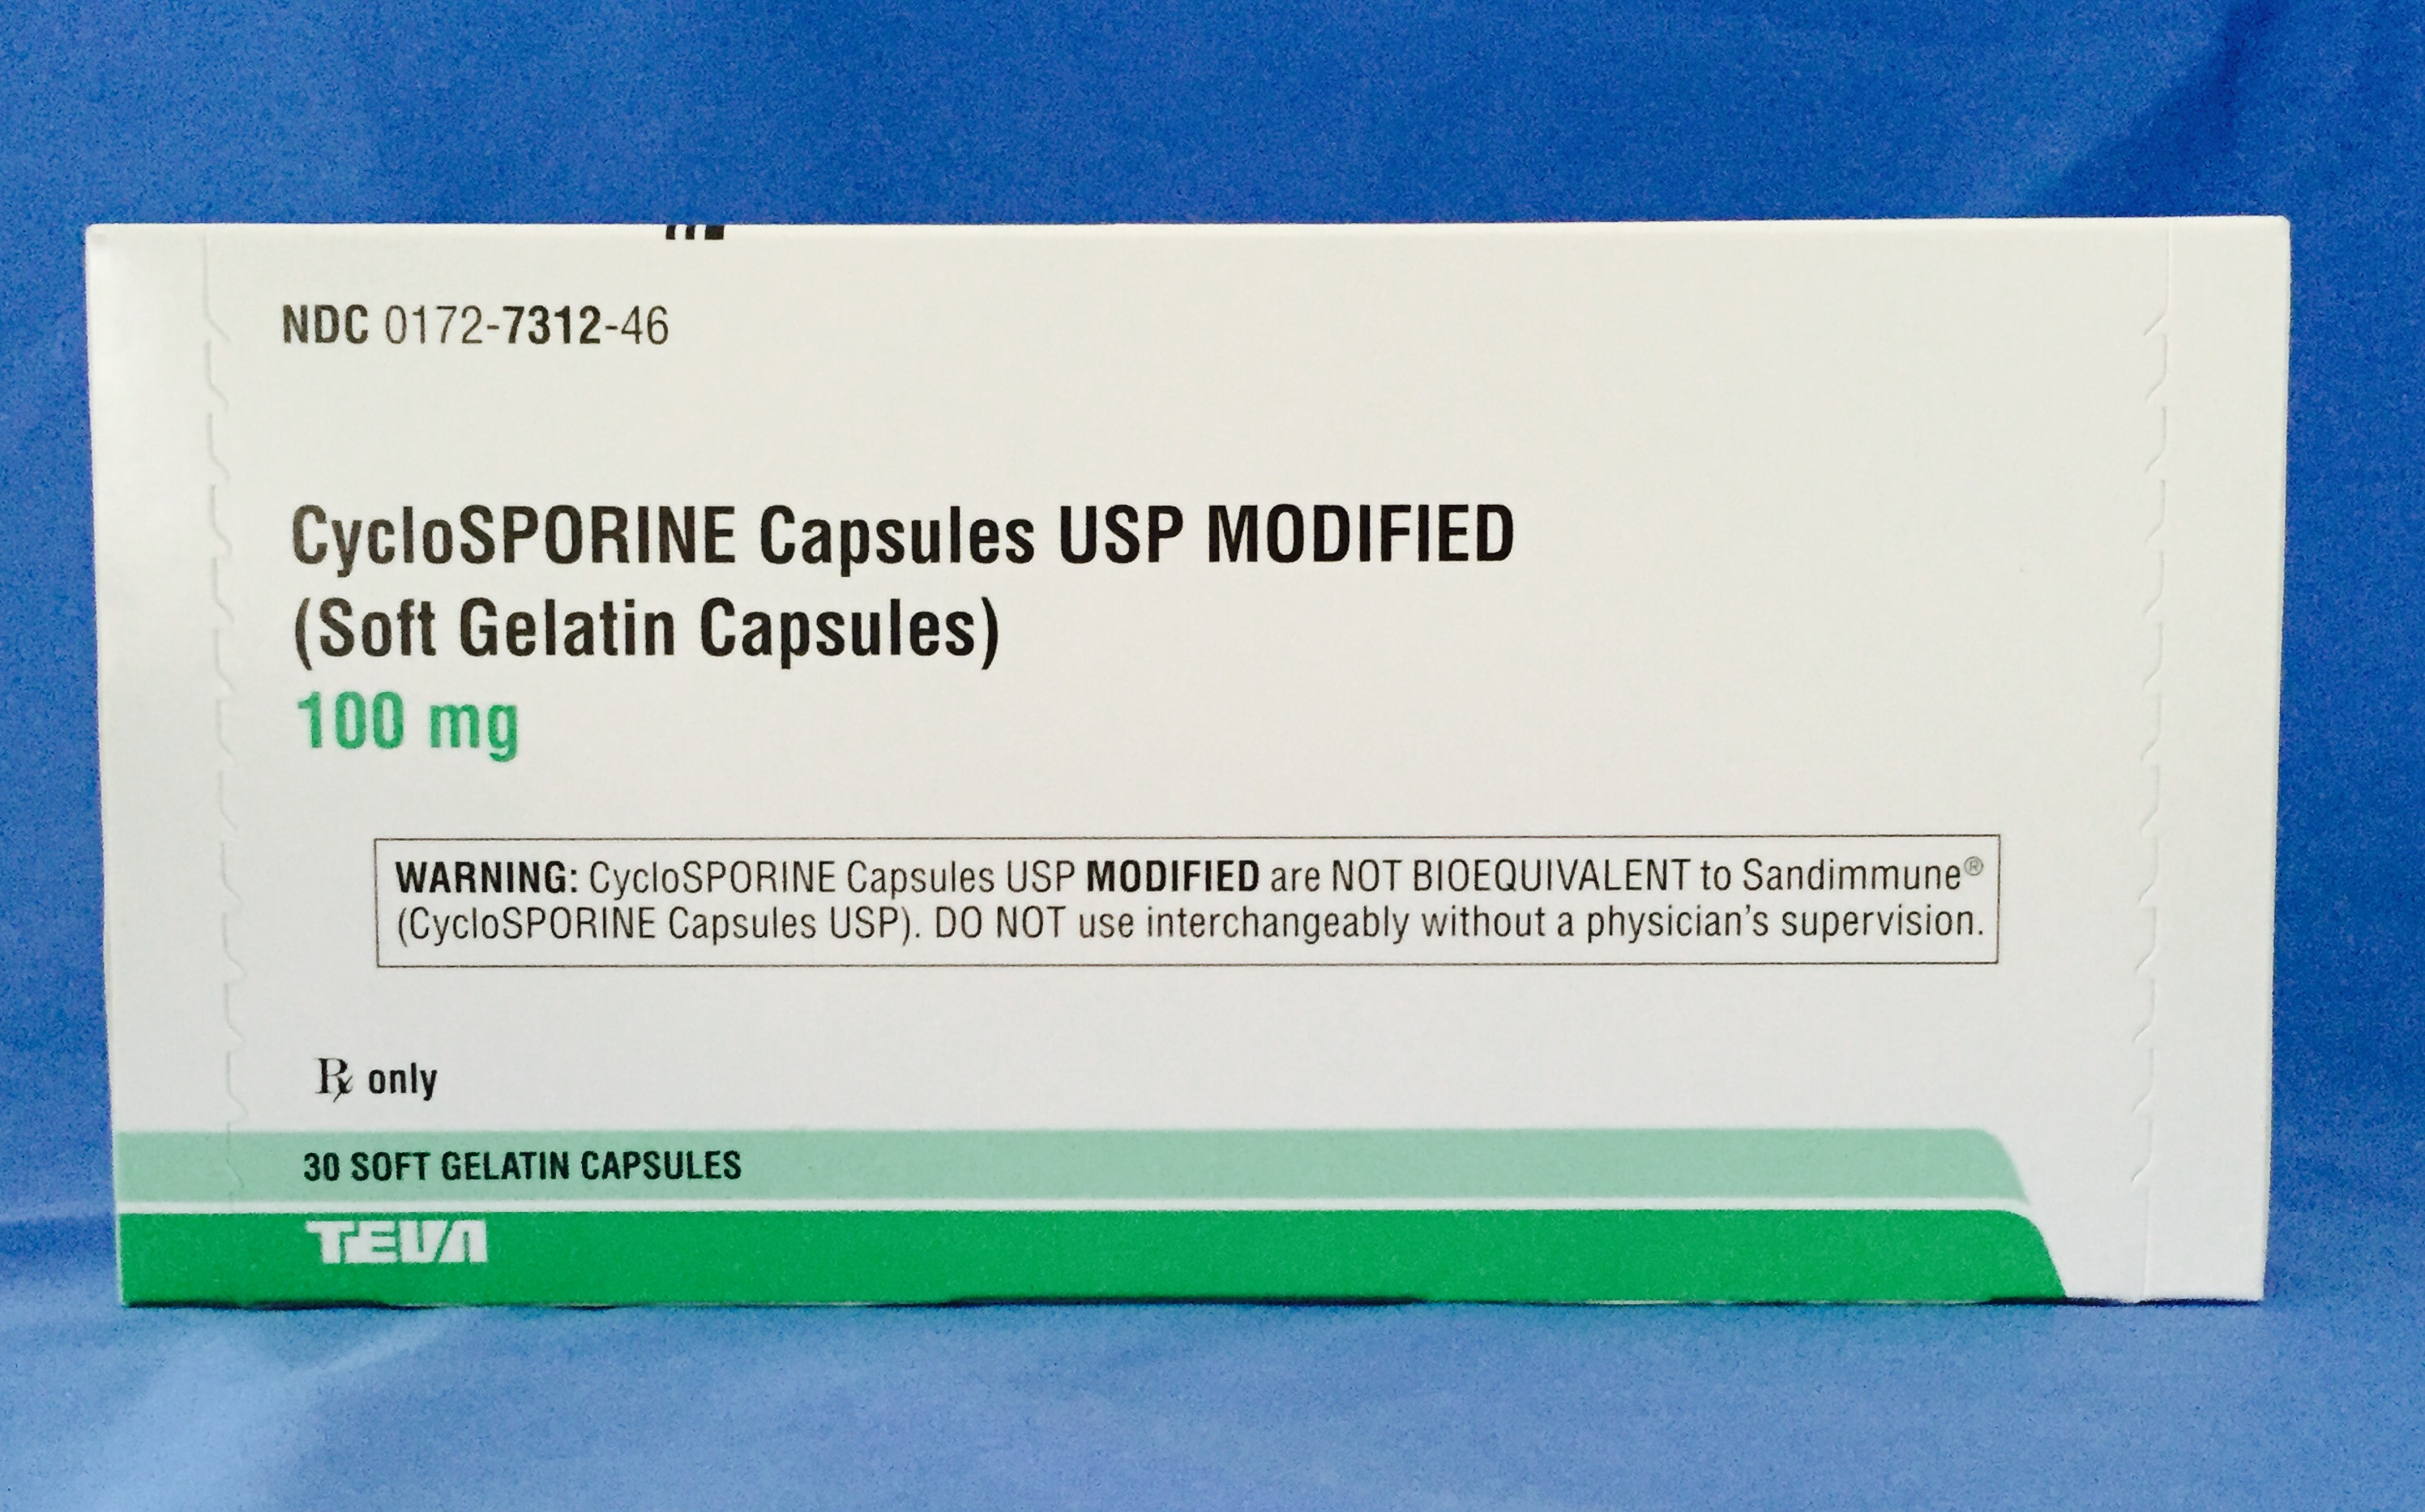 Cyclosporine 100mg Capsules USP MODIFIED for dogs and cats.